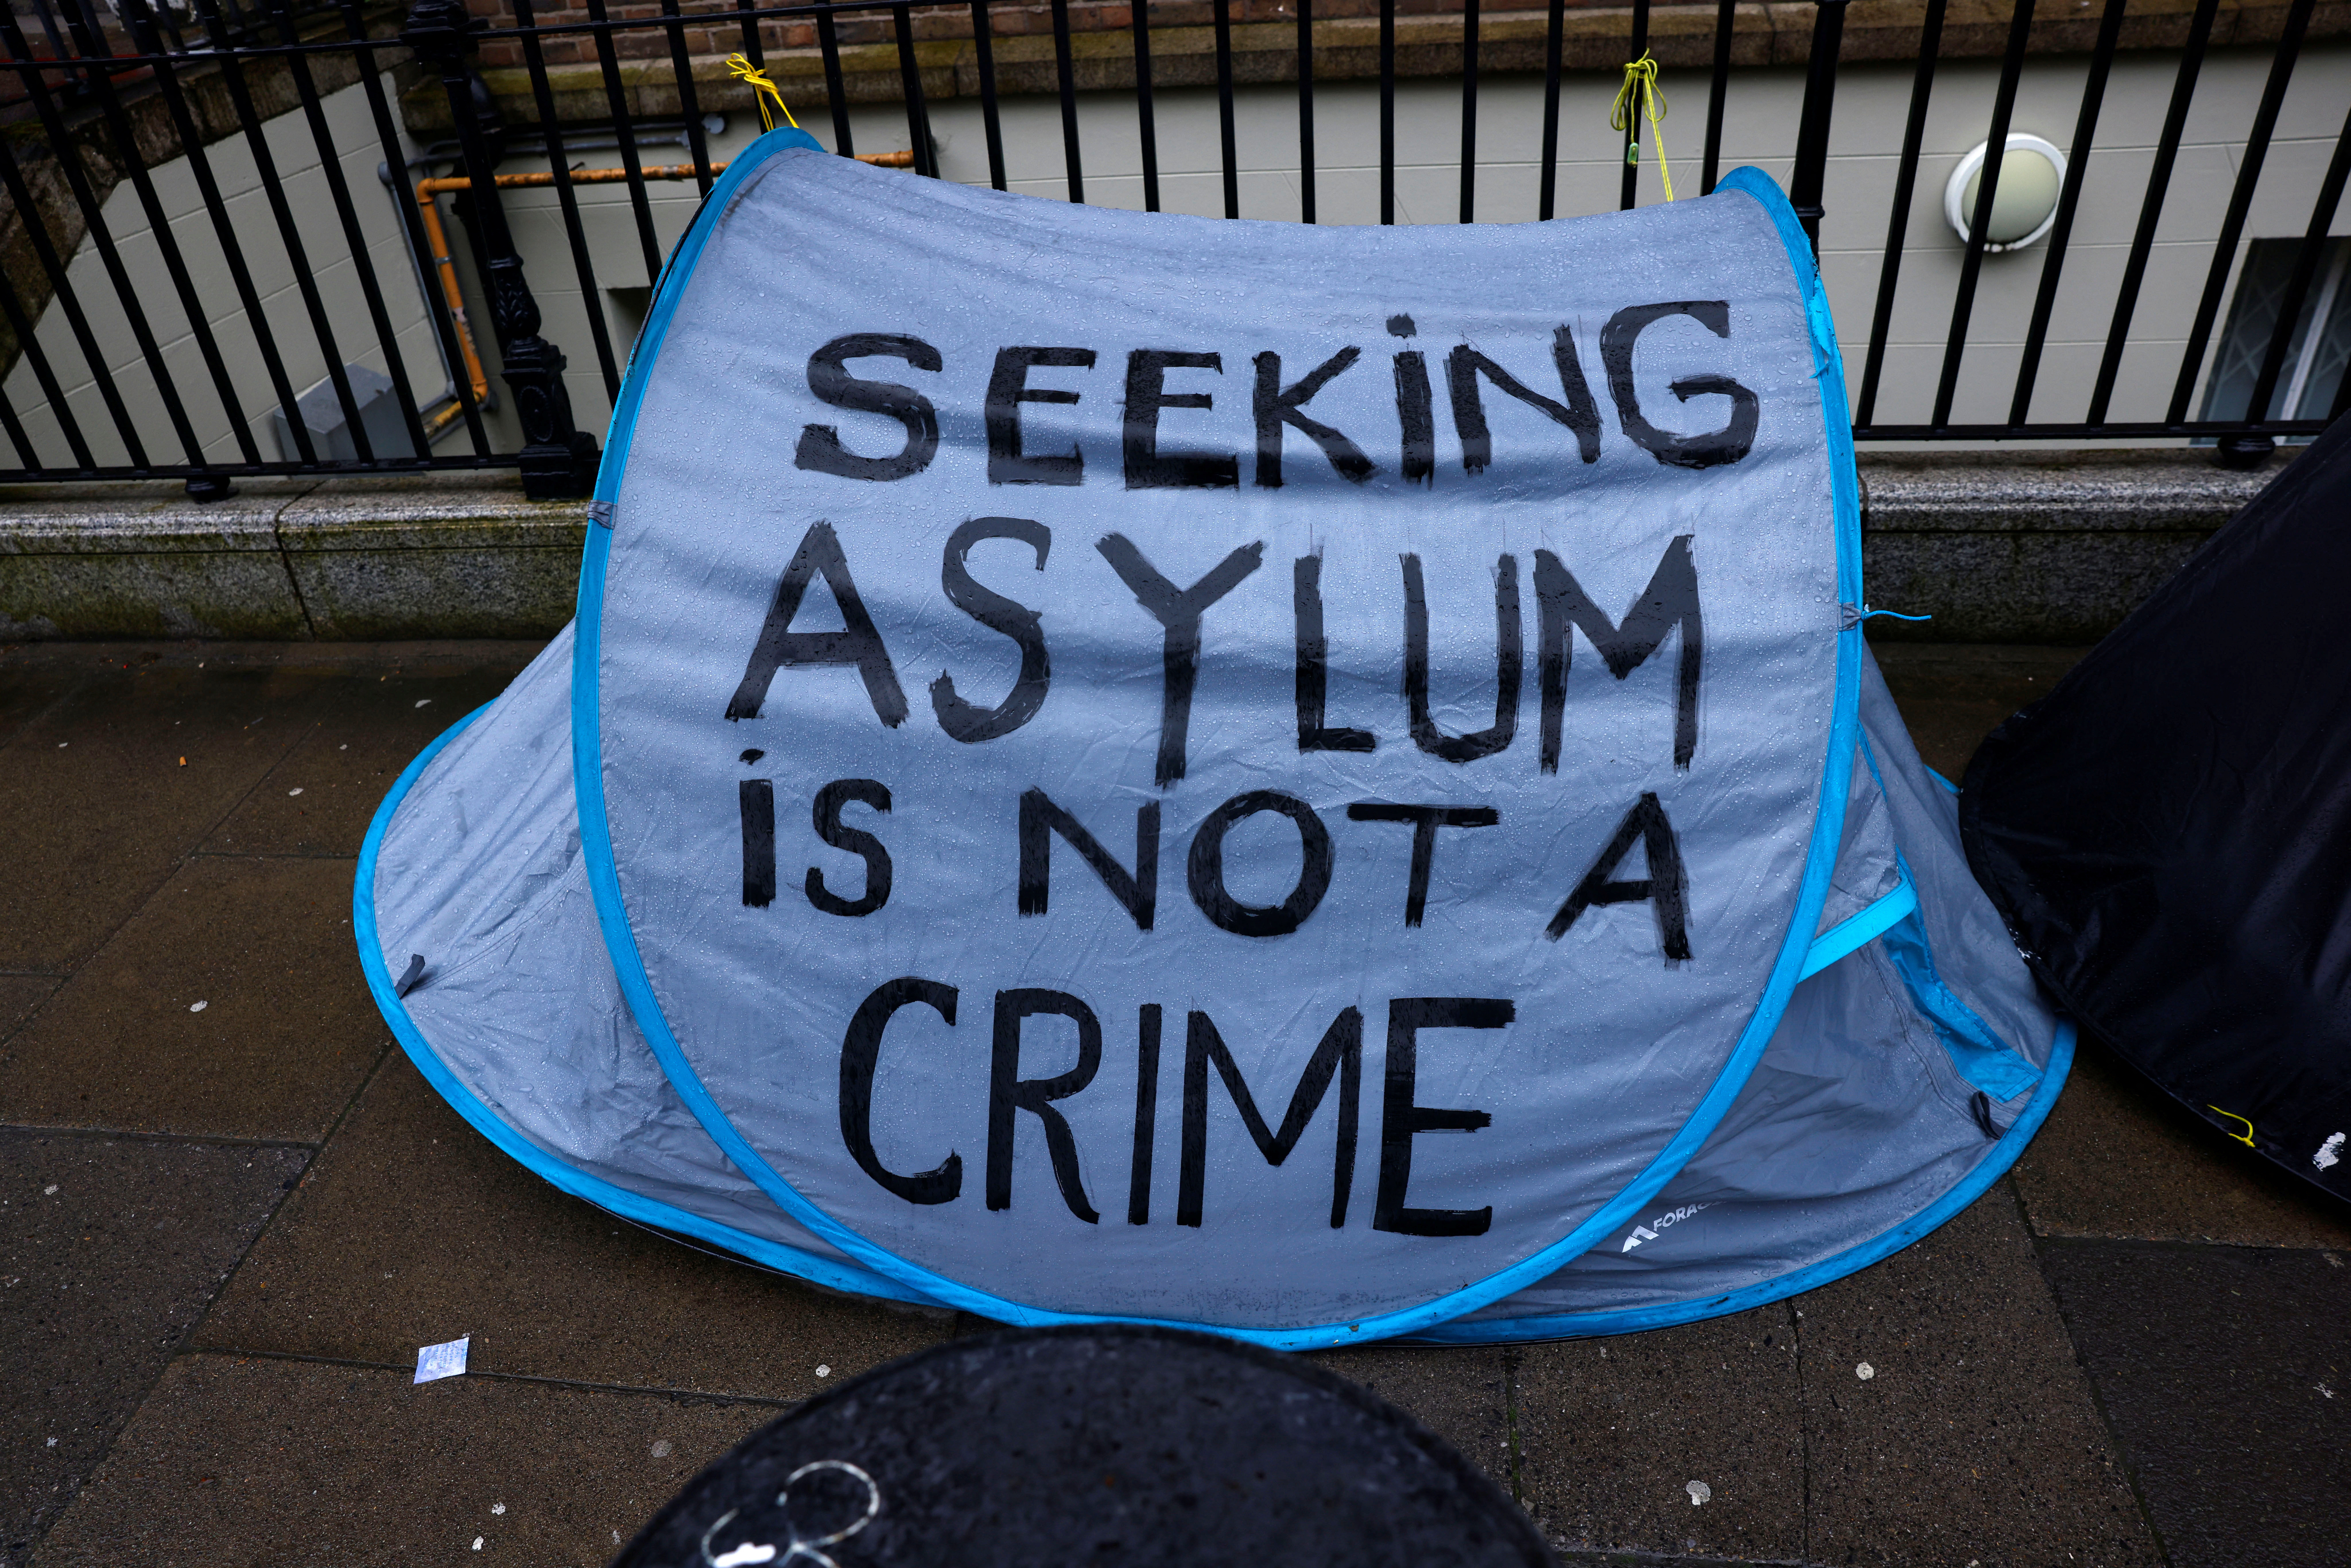 Asylum seekers camped outside the International Protection Office, in Dublin